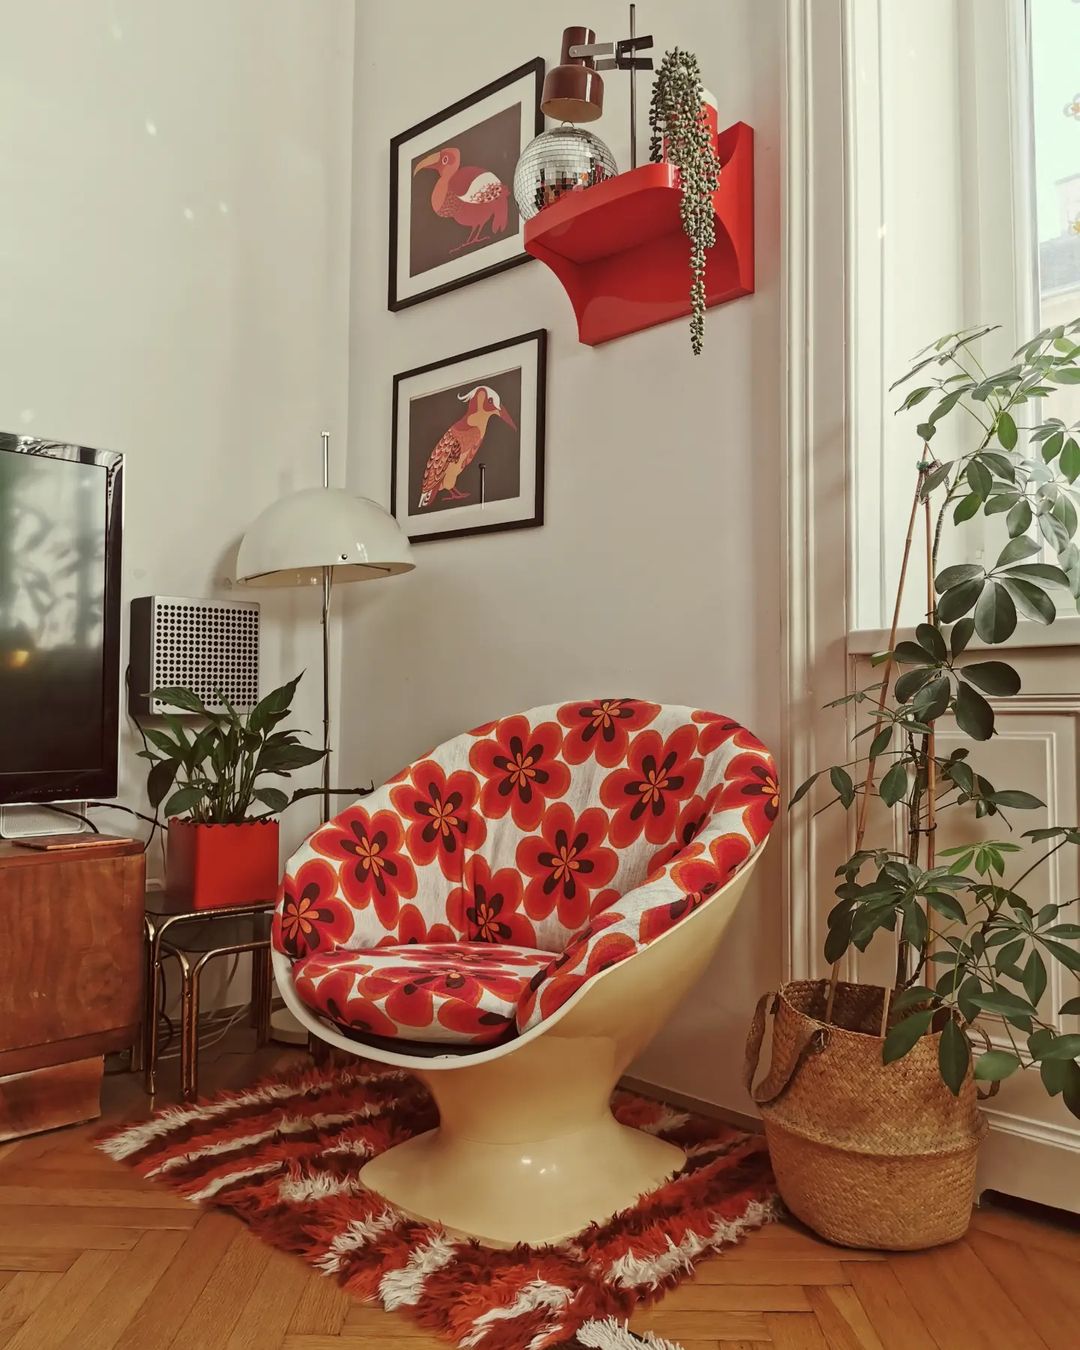 retro style chair with bold red colored upholstery to create a focal point in this living space